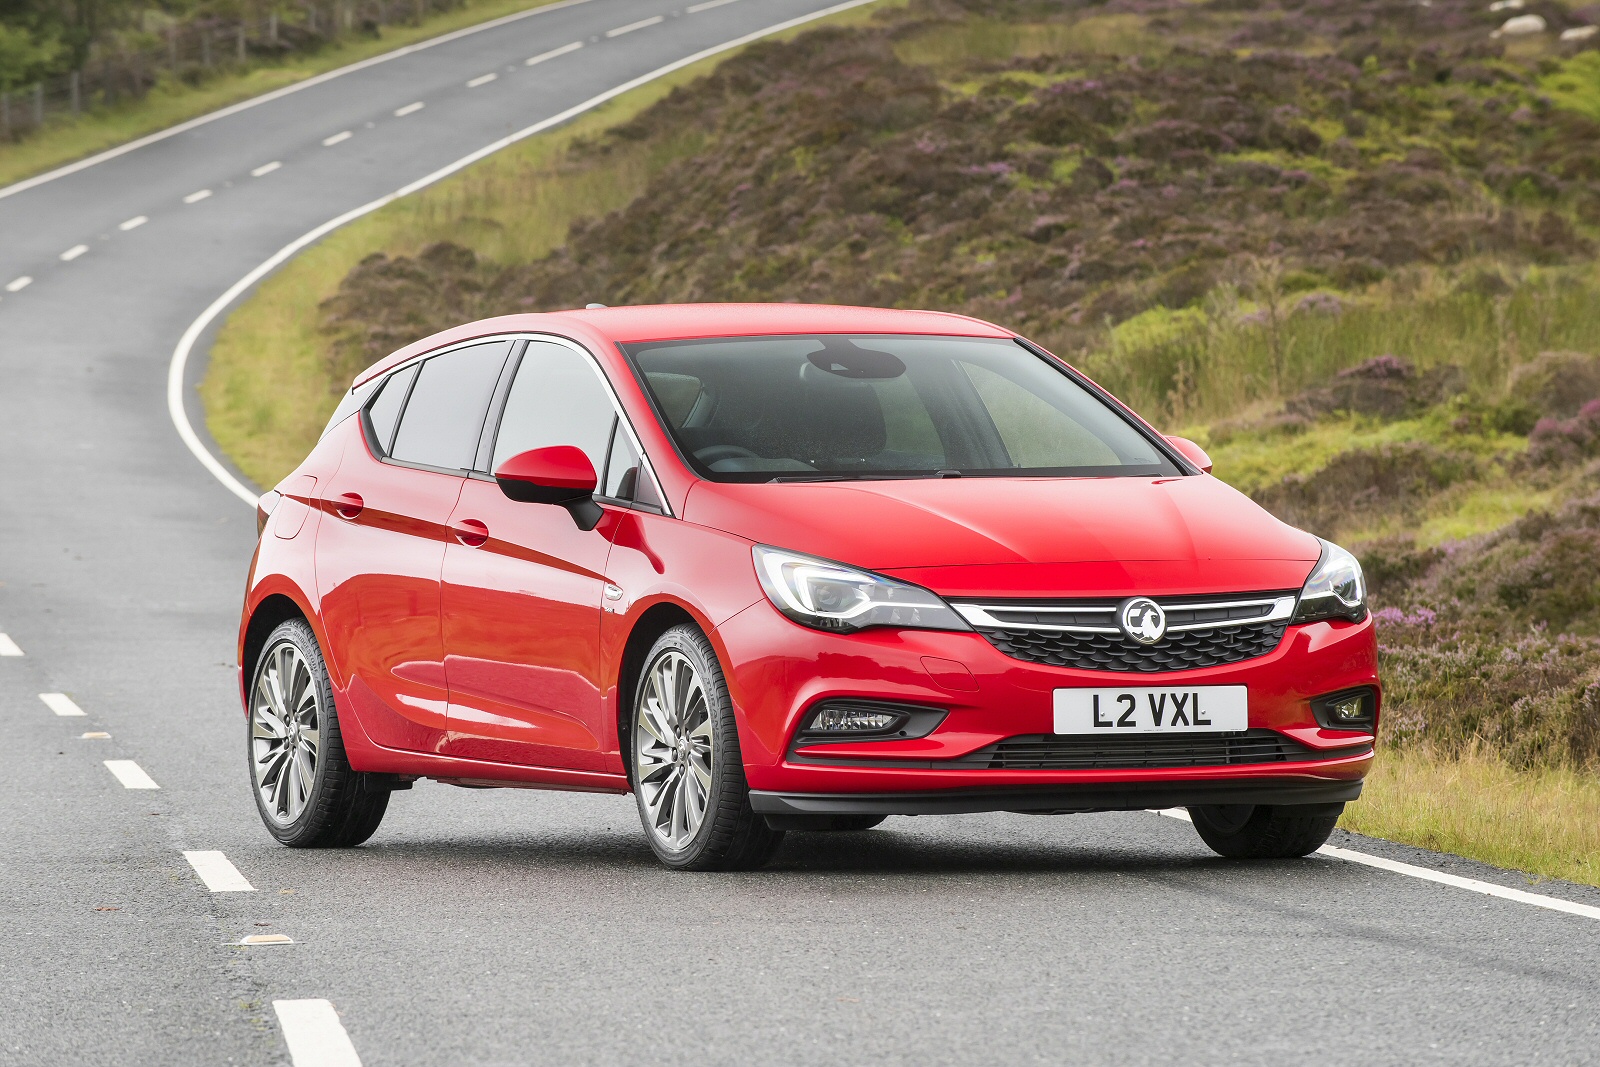 Are Vauxhall’s Reliable? An Unbiased Look at the British Brand